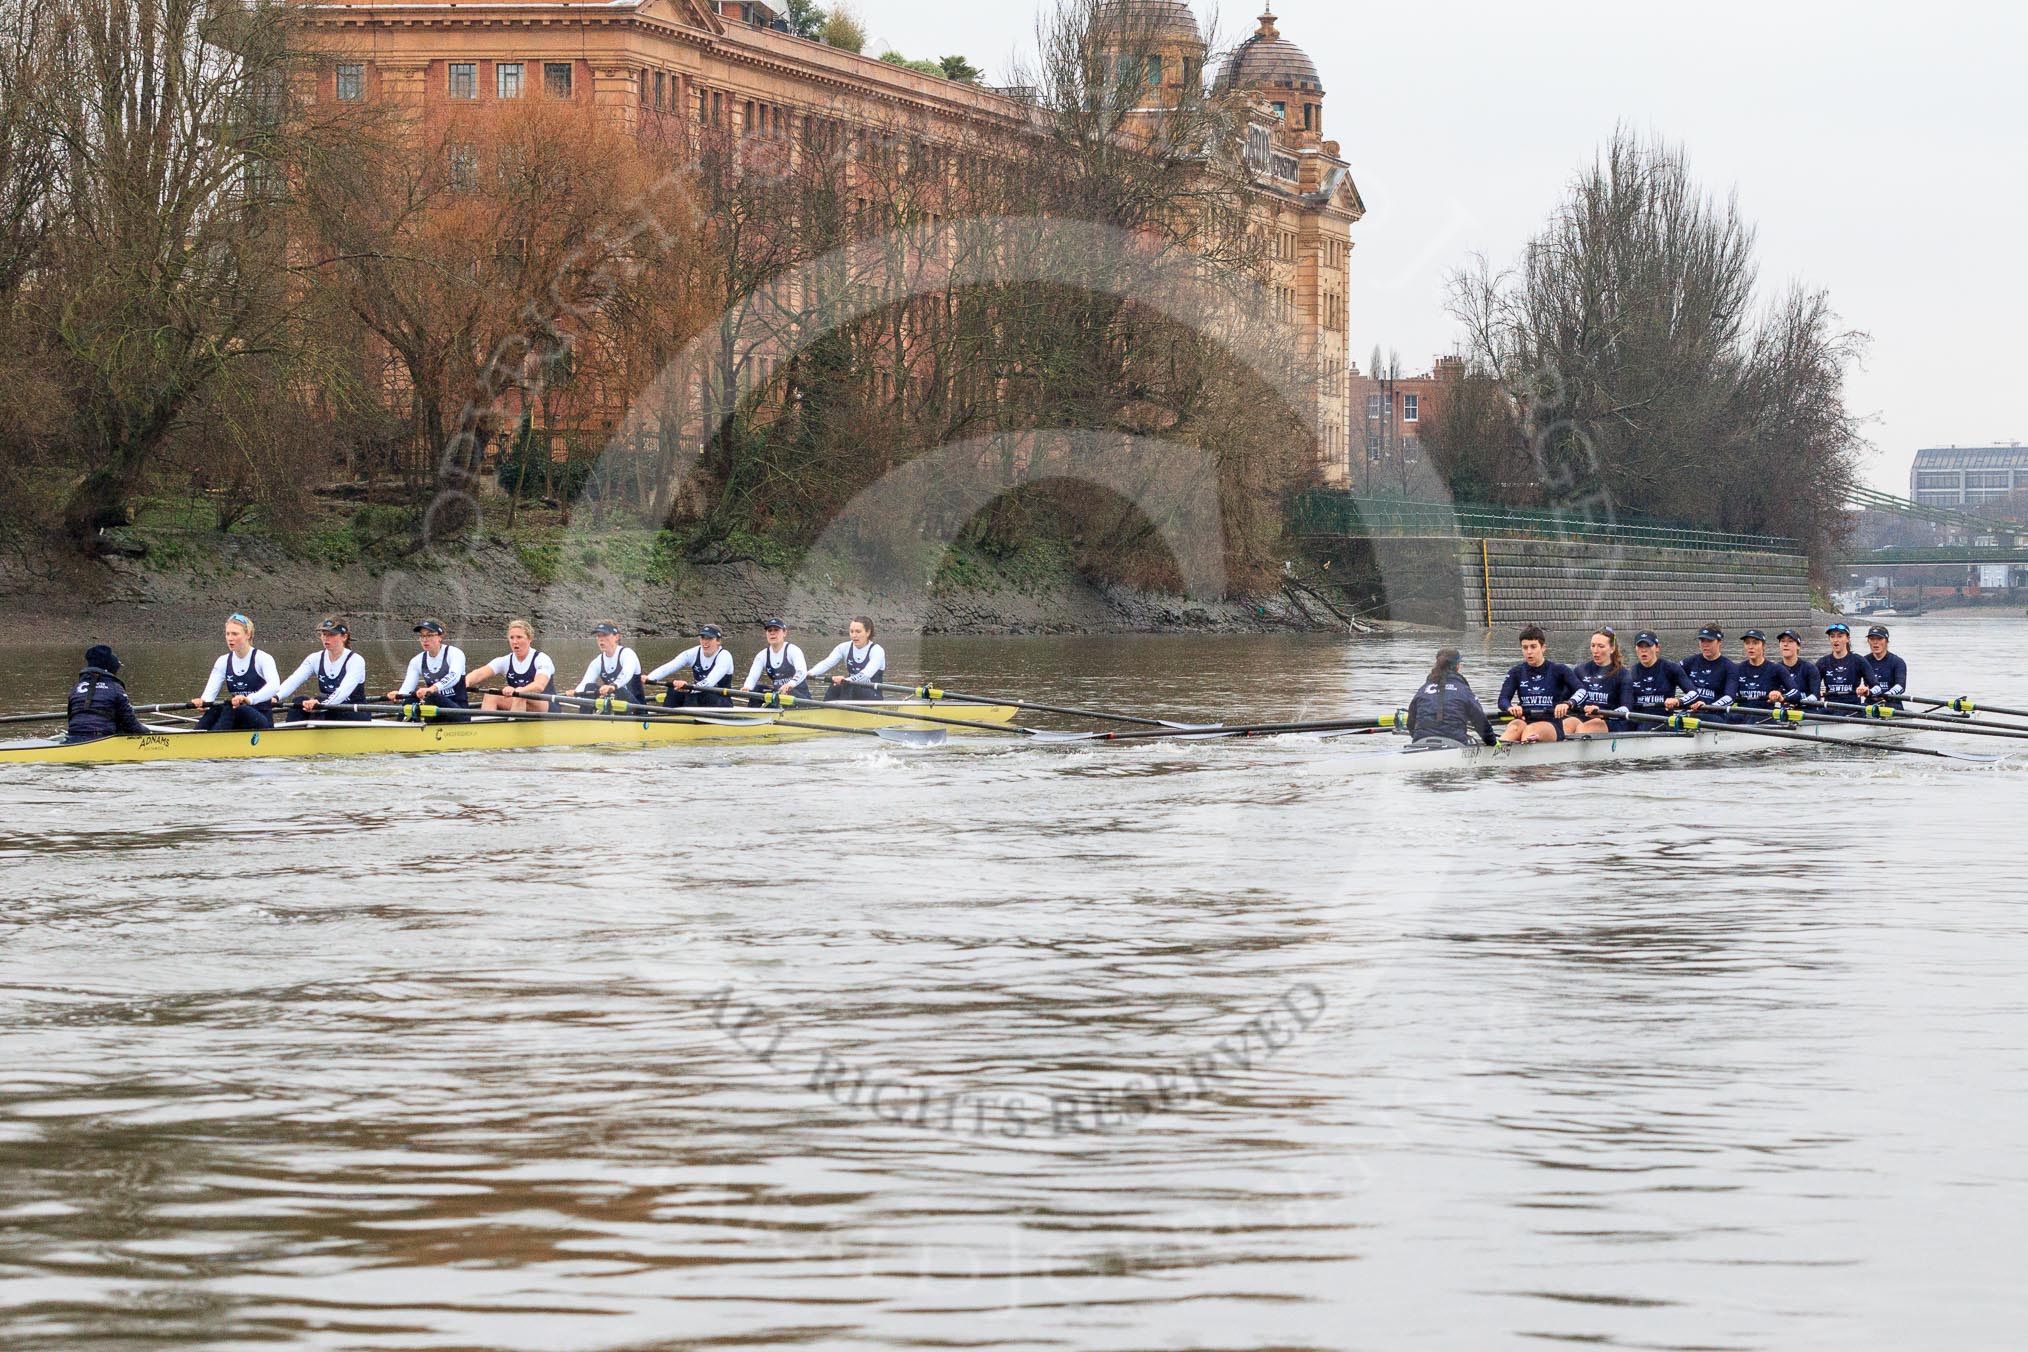 The Boat Race season 2018 - Women's Boat Race Trial Eights (OUWBC, Oxford): "Coursing River" and "Great Typhoon" near the Harrods Depository.
River Thames between Putney Bridge and Mortlake,
London SW15,

United Kingdom,
on 21 January 2018 at 14:33, image #85